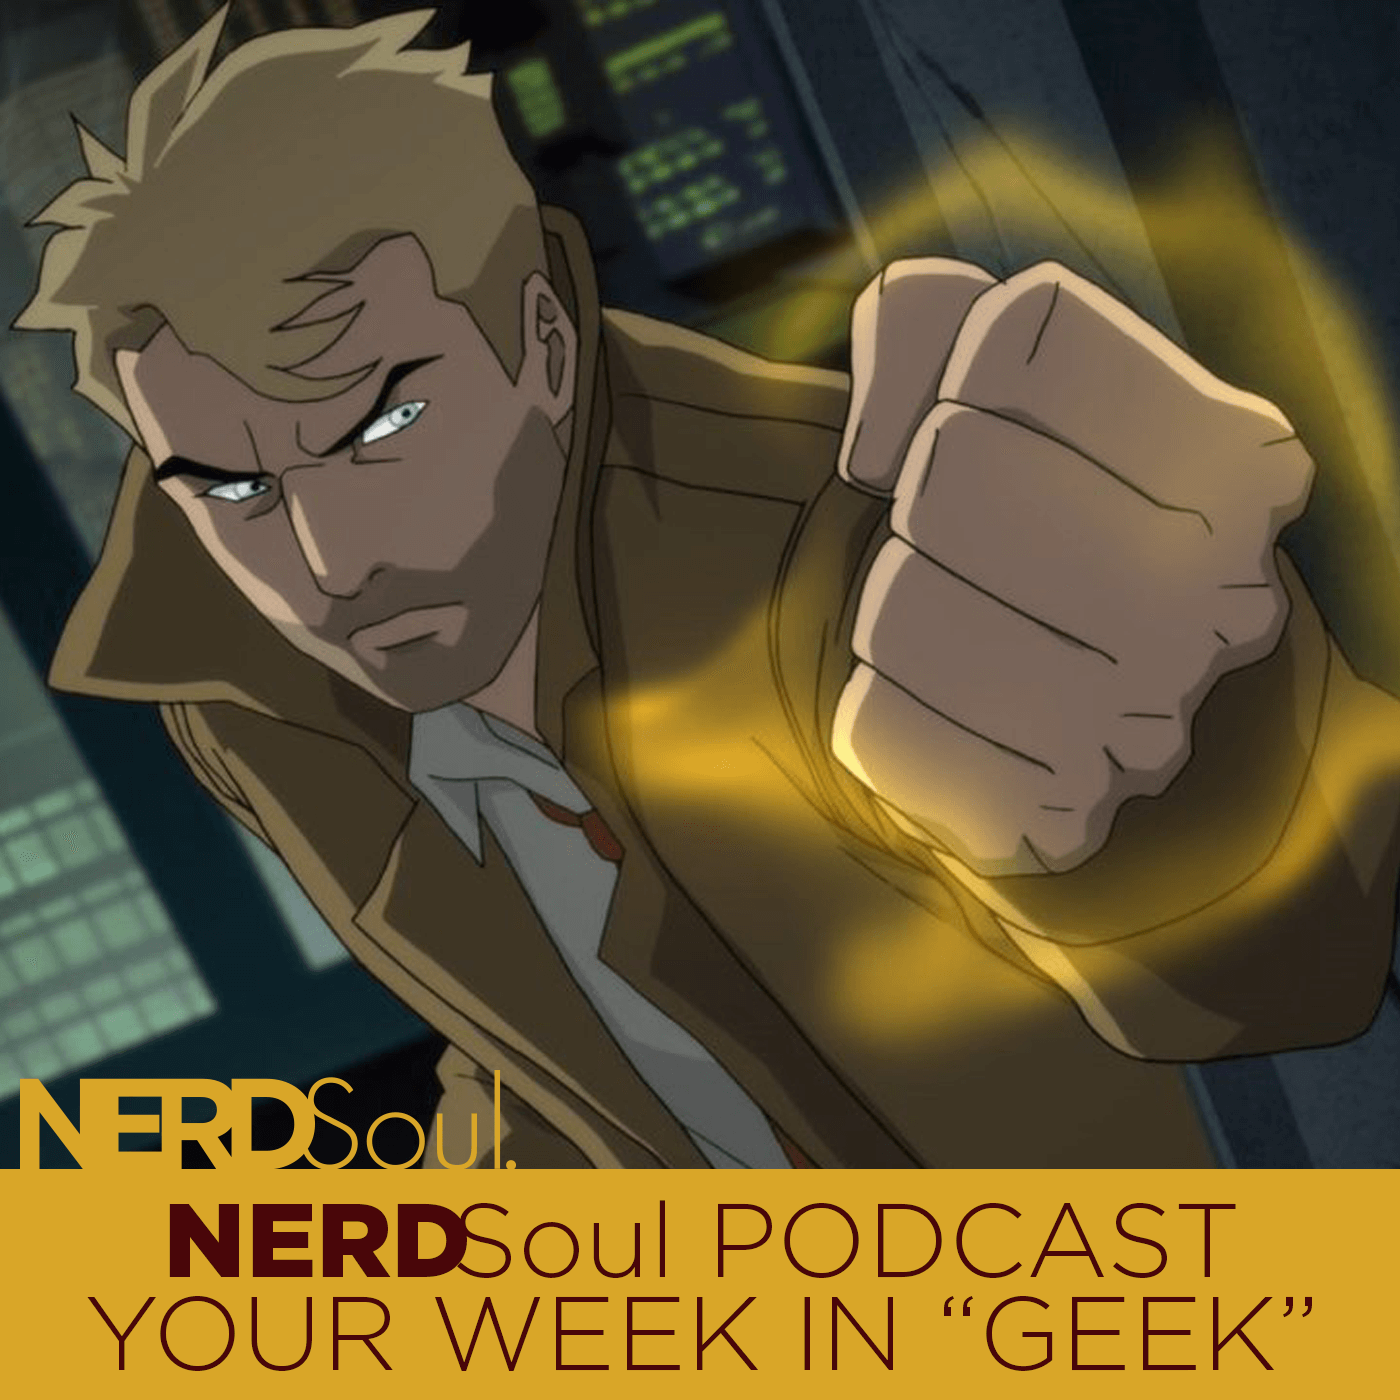 Constantine Demon City Is Here, Star Wars Solo May Be A Lando Movie, Roxanne Roxanne, Black Lightning, Suicide Squad & More! | NERDSoul • Your Week in Geek